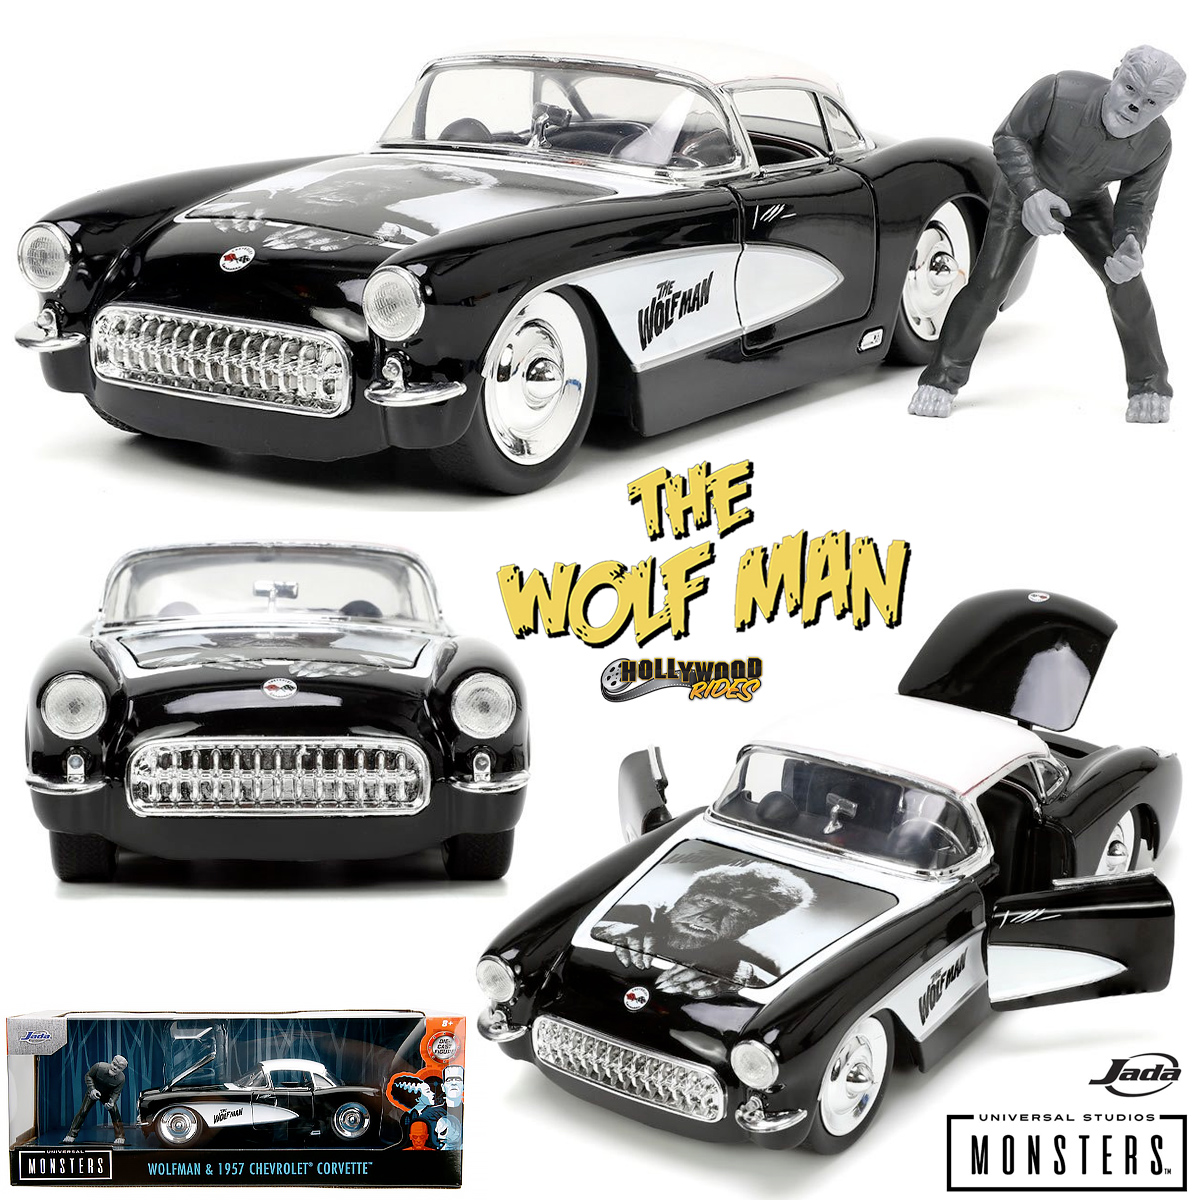 Universal Monsters Hollywood Rides: Wolfman & Chevrolet Corvette 1957